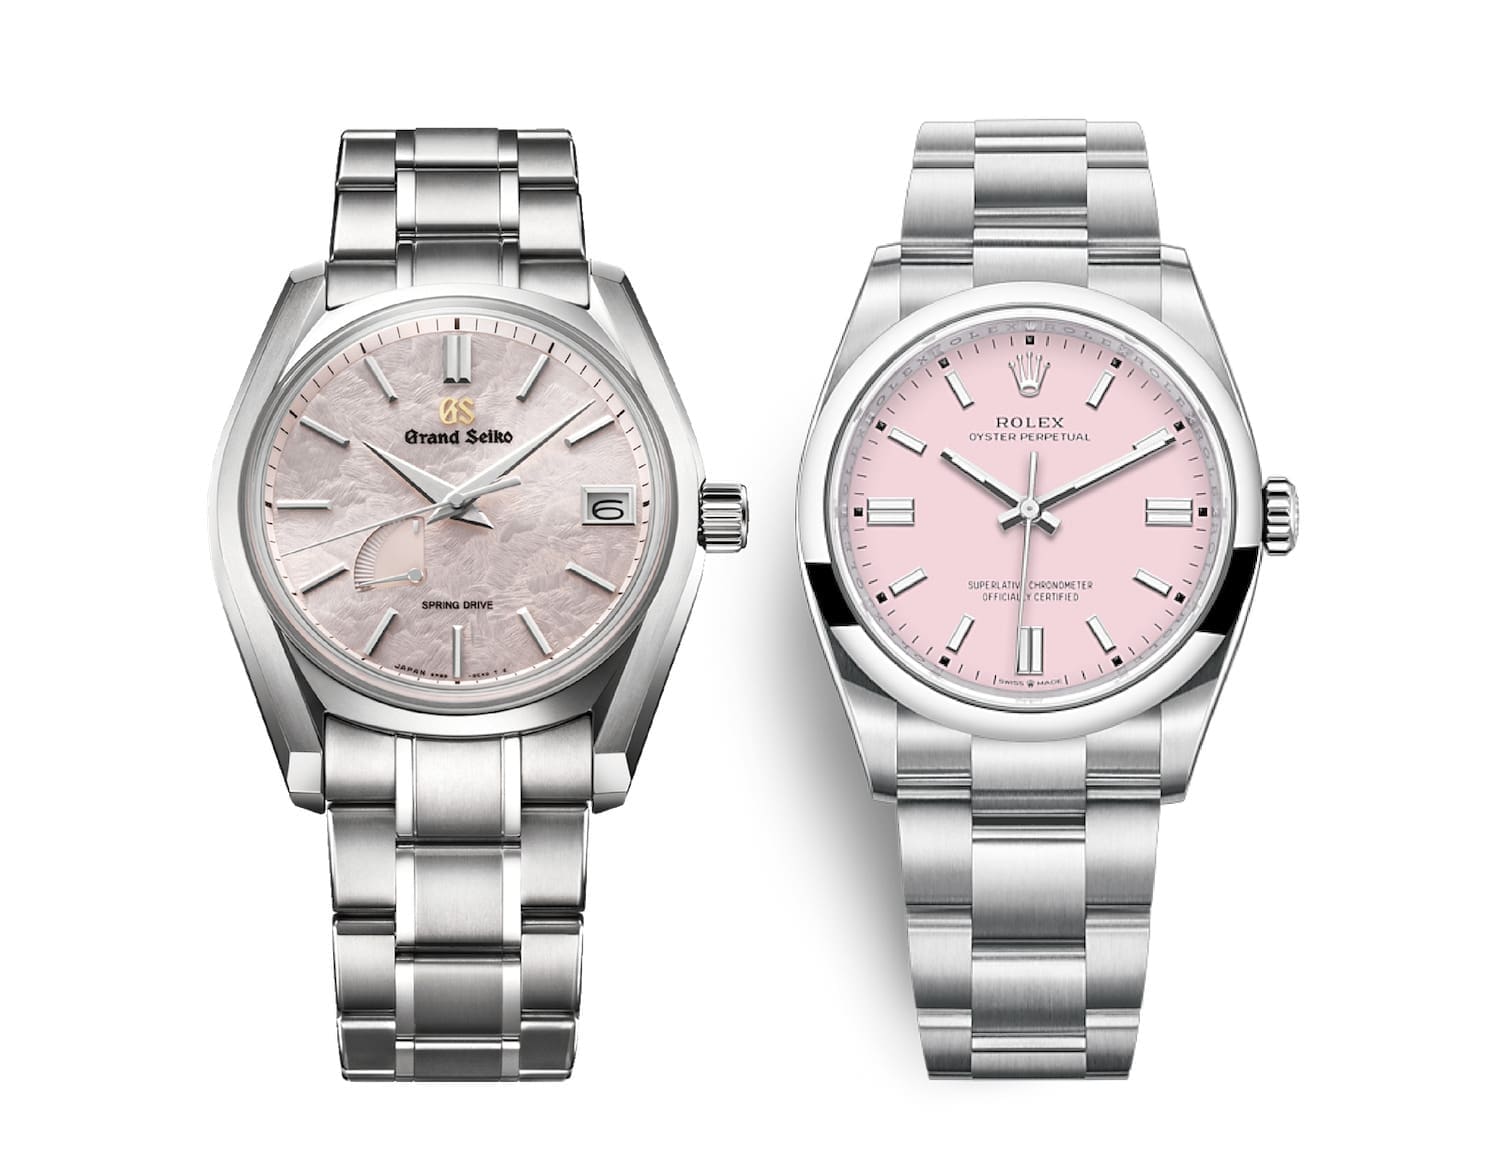 The ‘other’ pink watch: Why I bought the Grand Seiko SBGA413 instead of waiting for the pink Rolex OP 36